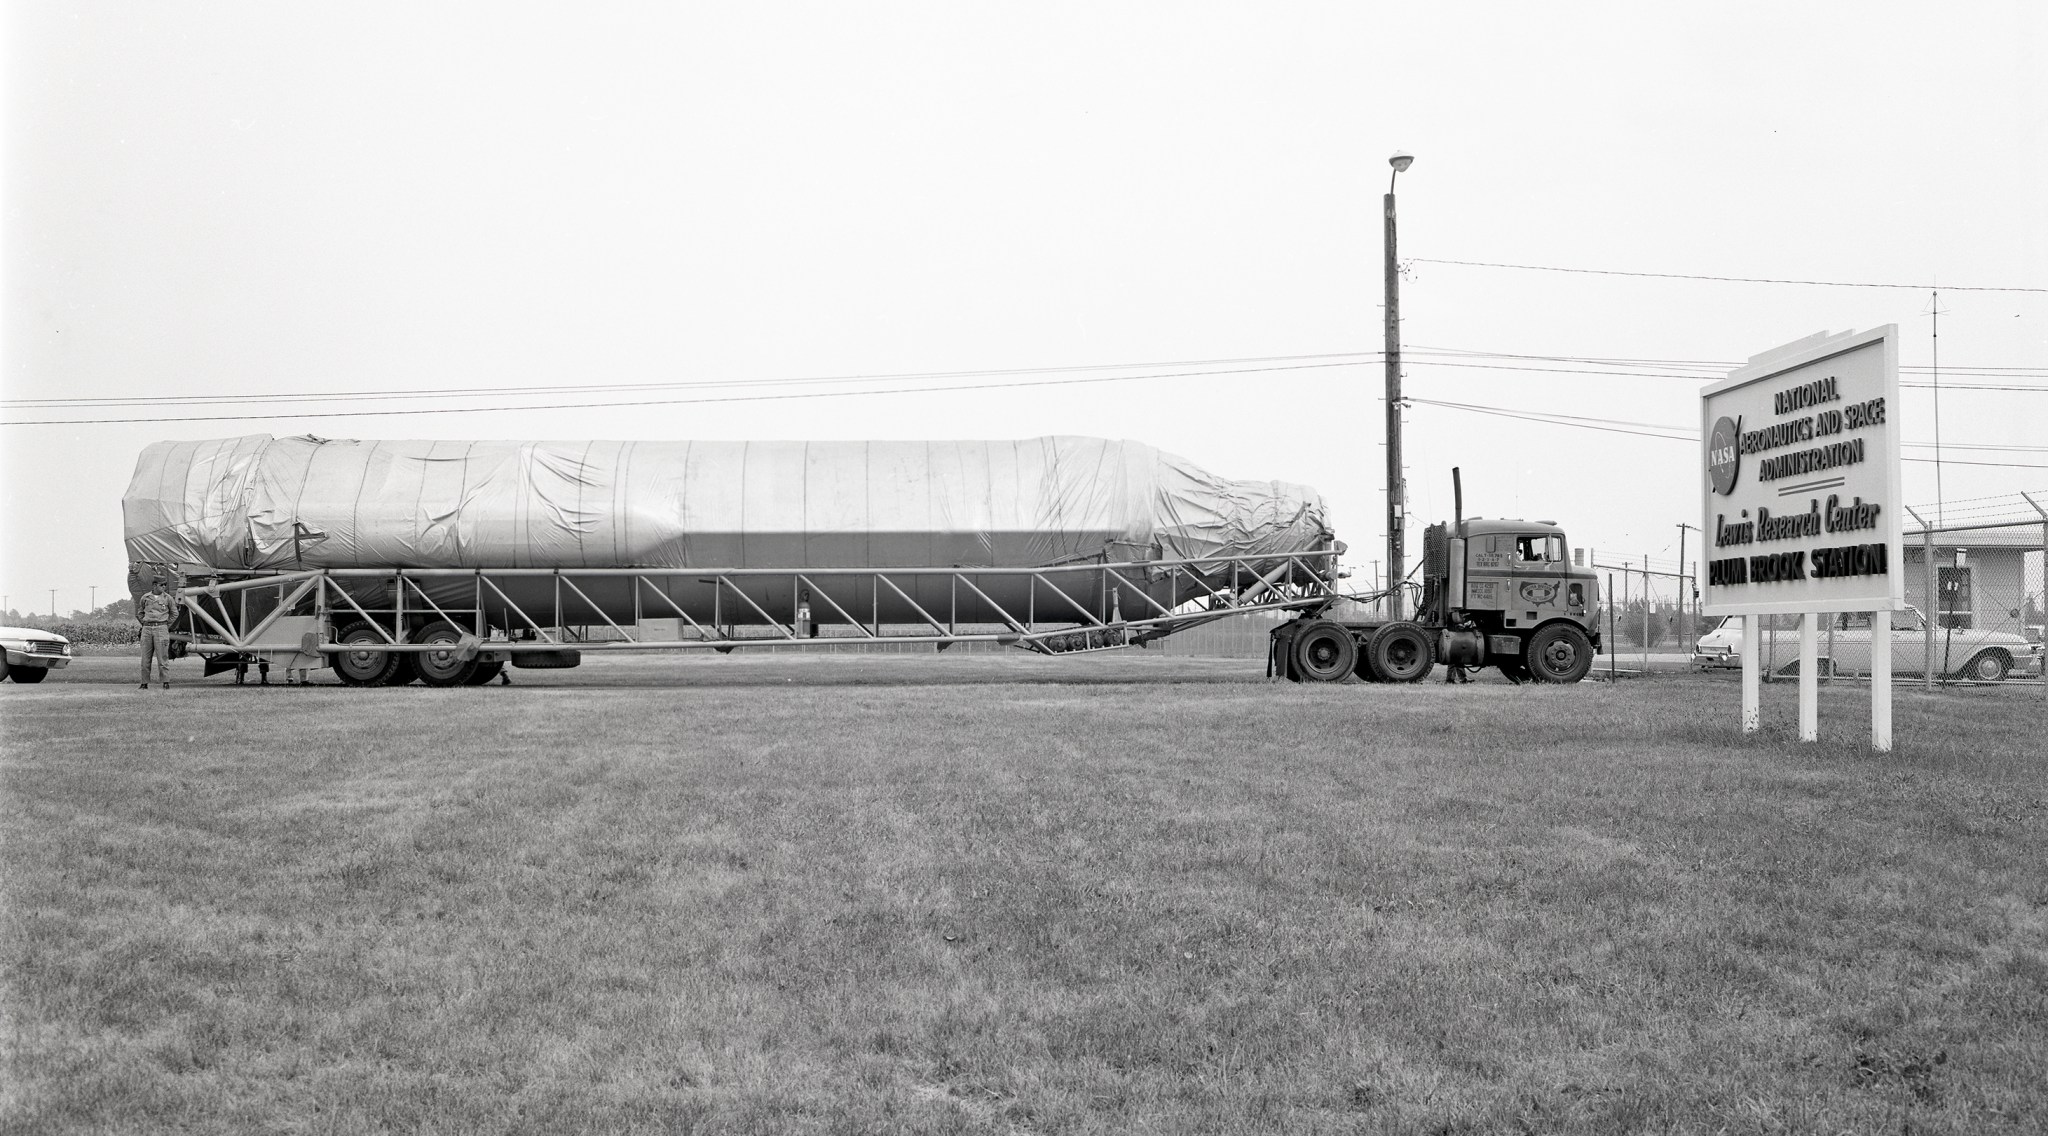 A rocket sits horizontally on a flatbed tractor trailer outside front gate.